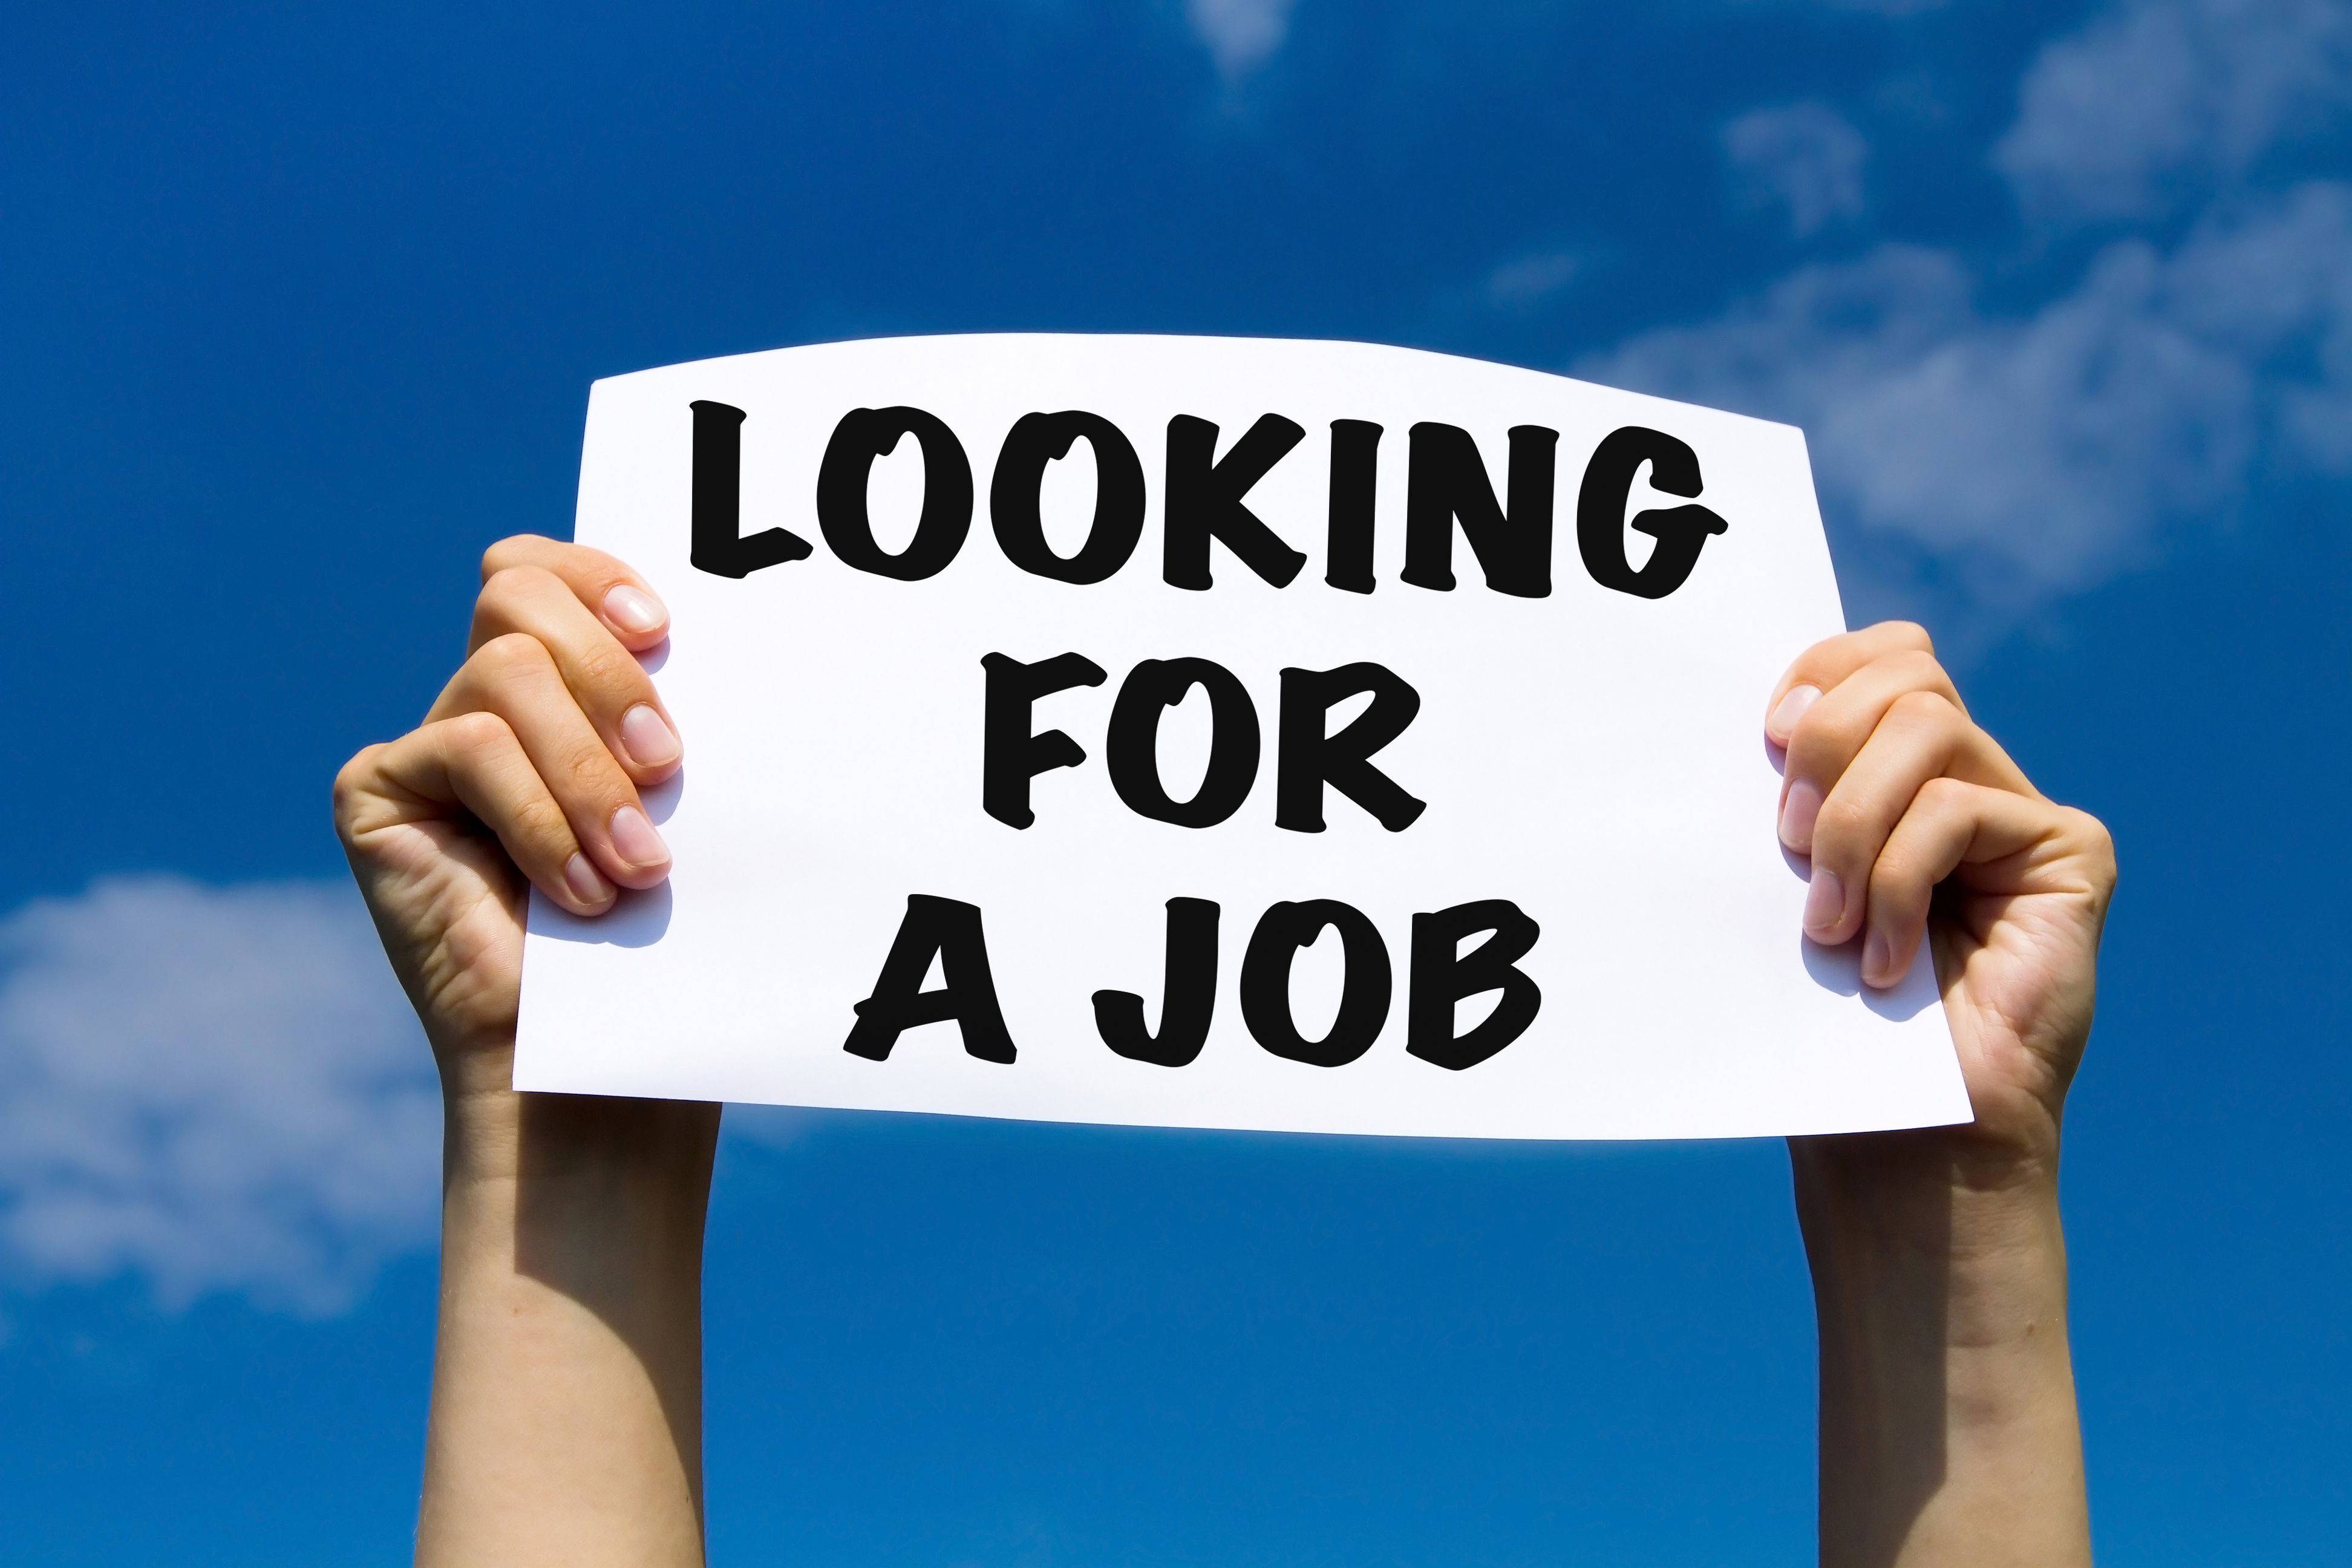 For looking a new one. Looking for a job. Look for a job. Jobs картинки. Джоб картинки.